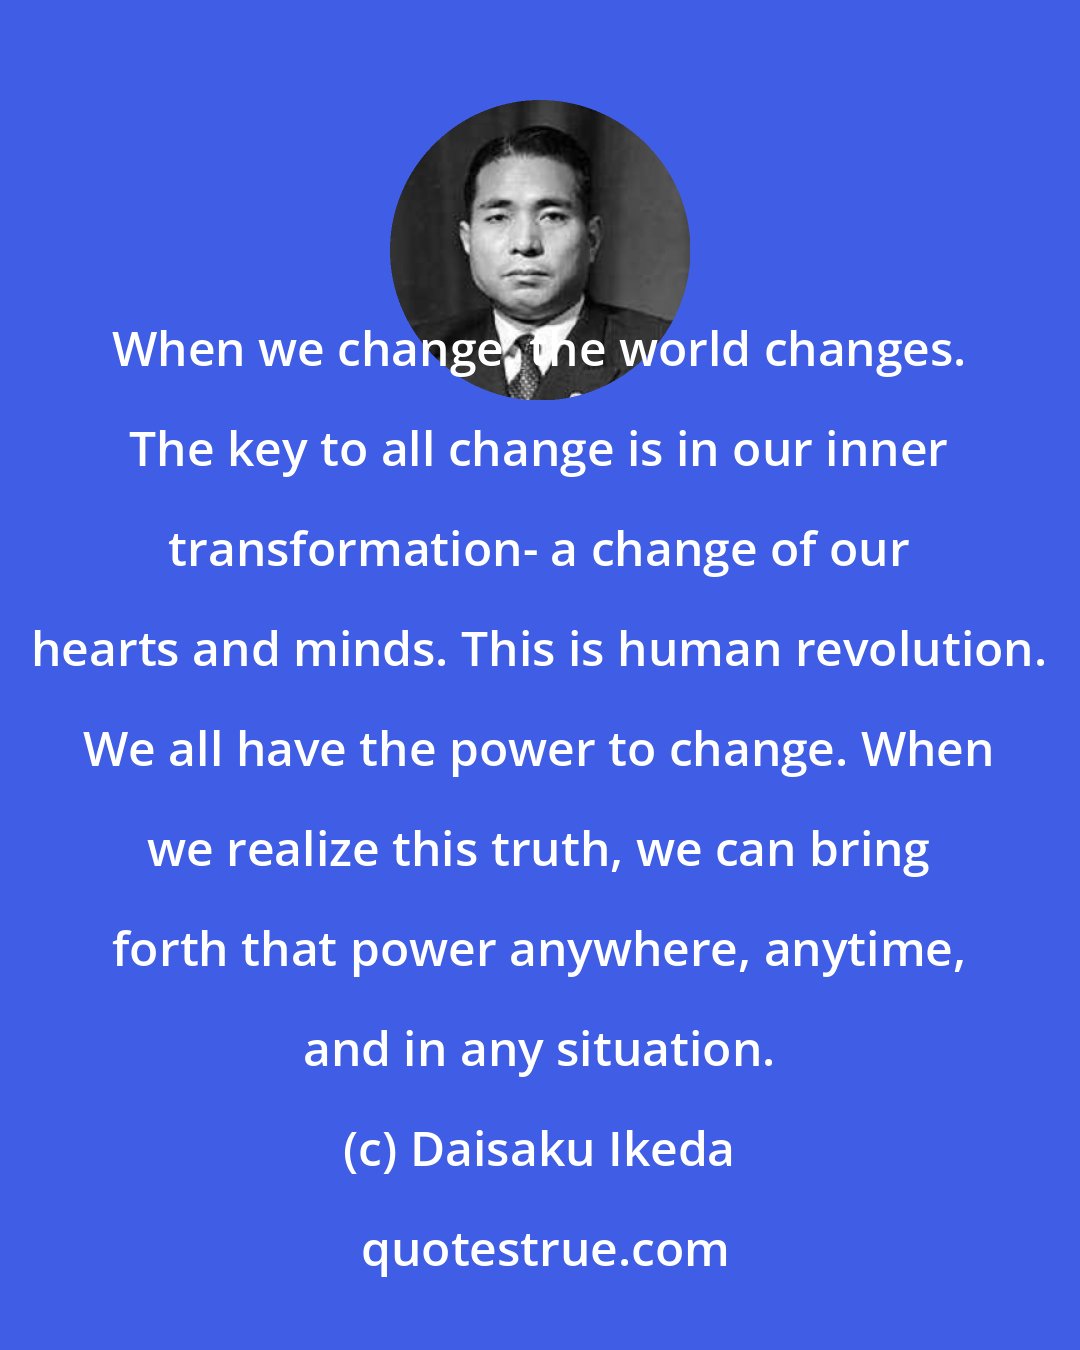 Daisaku Ikeda: When we change, the world changes. The key to all change is in our inner transformation- a change of our hearts and minds. This is human revolution. We all have the power to change. When we realize this truth, we can bring forth that power anywhere, anytime, and in any situation.